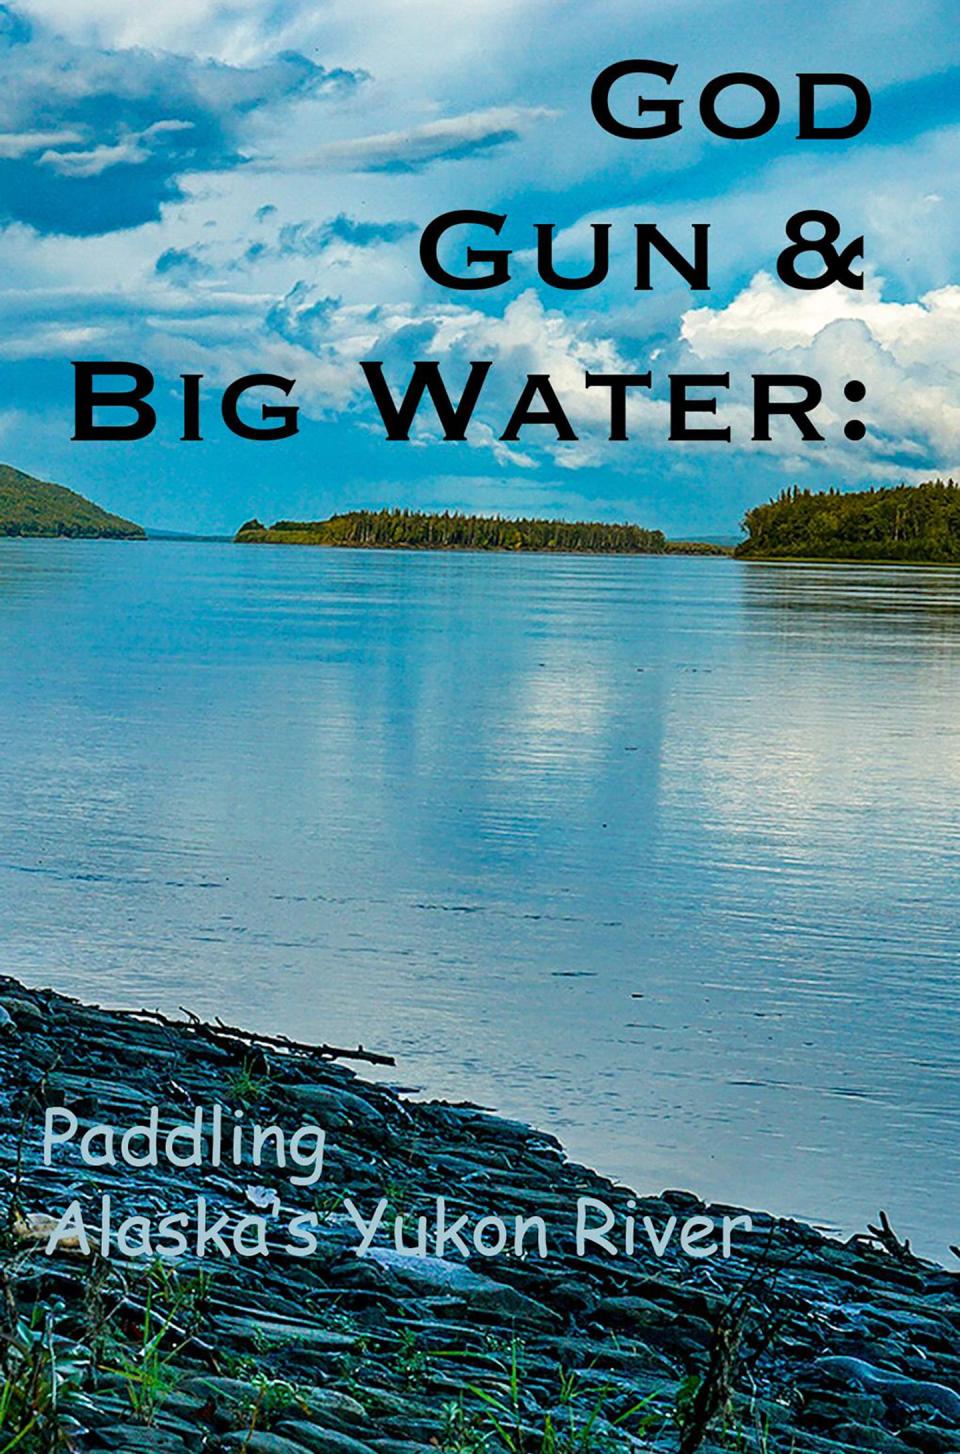 Gary Tomlin, a Galesburg native, will be signing copies of his book, “God, Gun and Big Water: Paddling Alaska’s Mighty Yukon River” Saturday in Peoria and Galesburg. Signings will be from 10 a.n. to 1 p.m. at Bushwhacker, 5728 N. Knoxville Ave.; Peoria, and 3-5 p.m. at the Illinois Citizen Soldier Museum, Galesburg VFW Post 2257, 1001 Michigan Ave.
(Photo: Gary Tomlin)